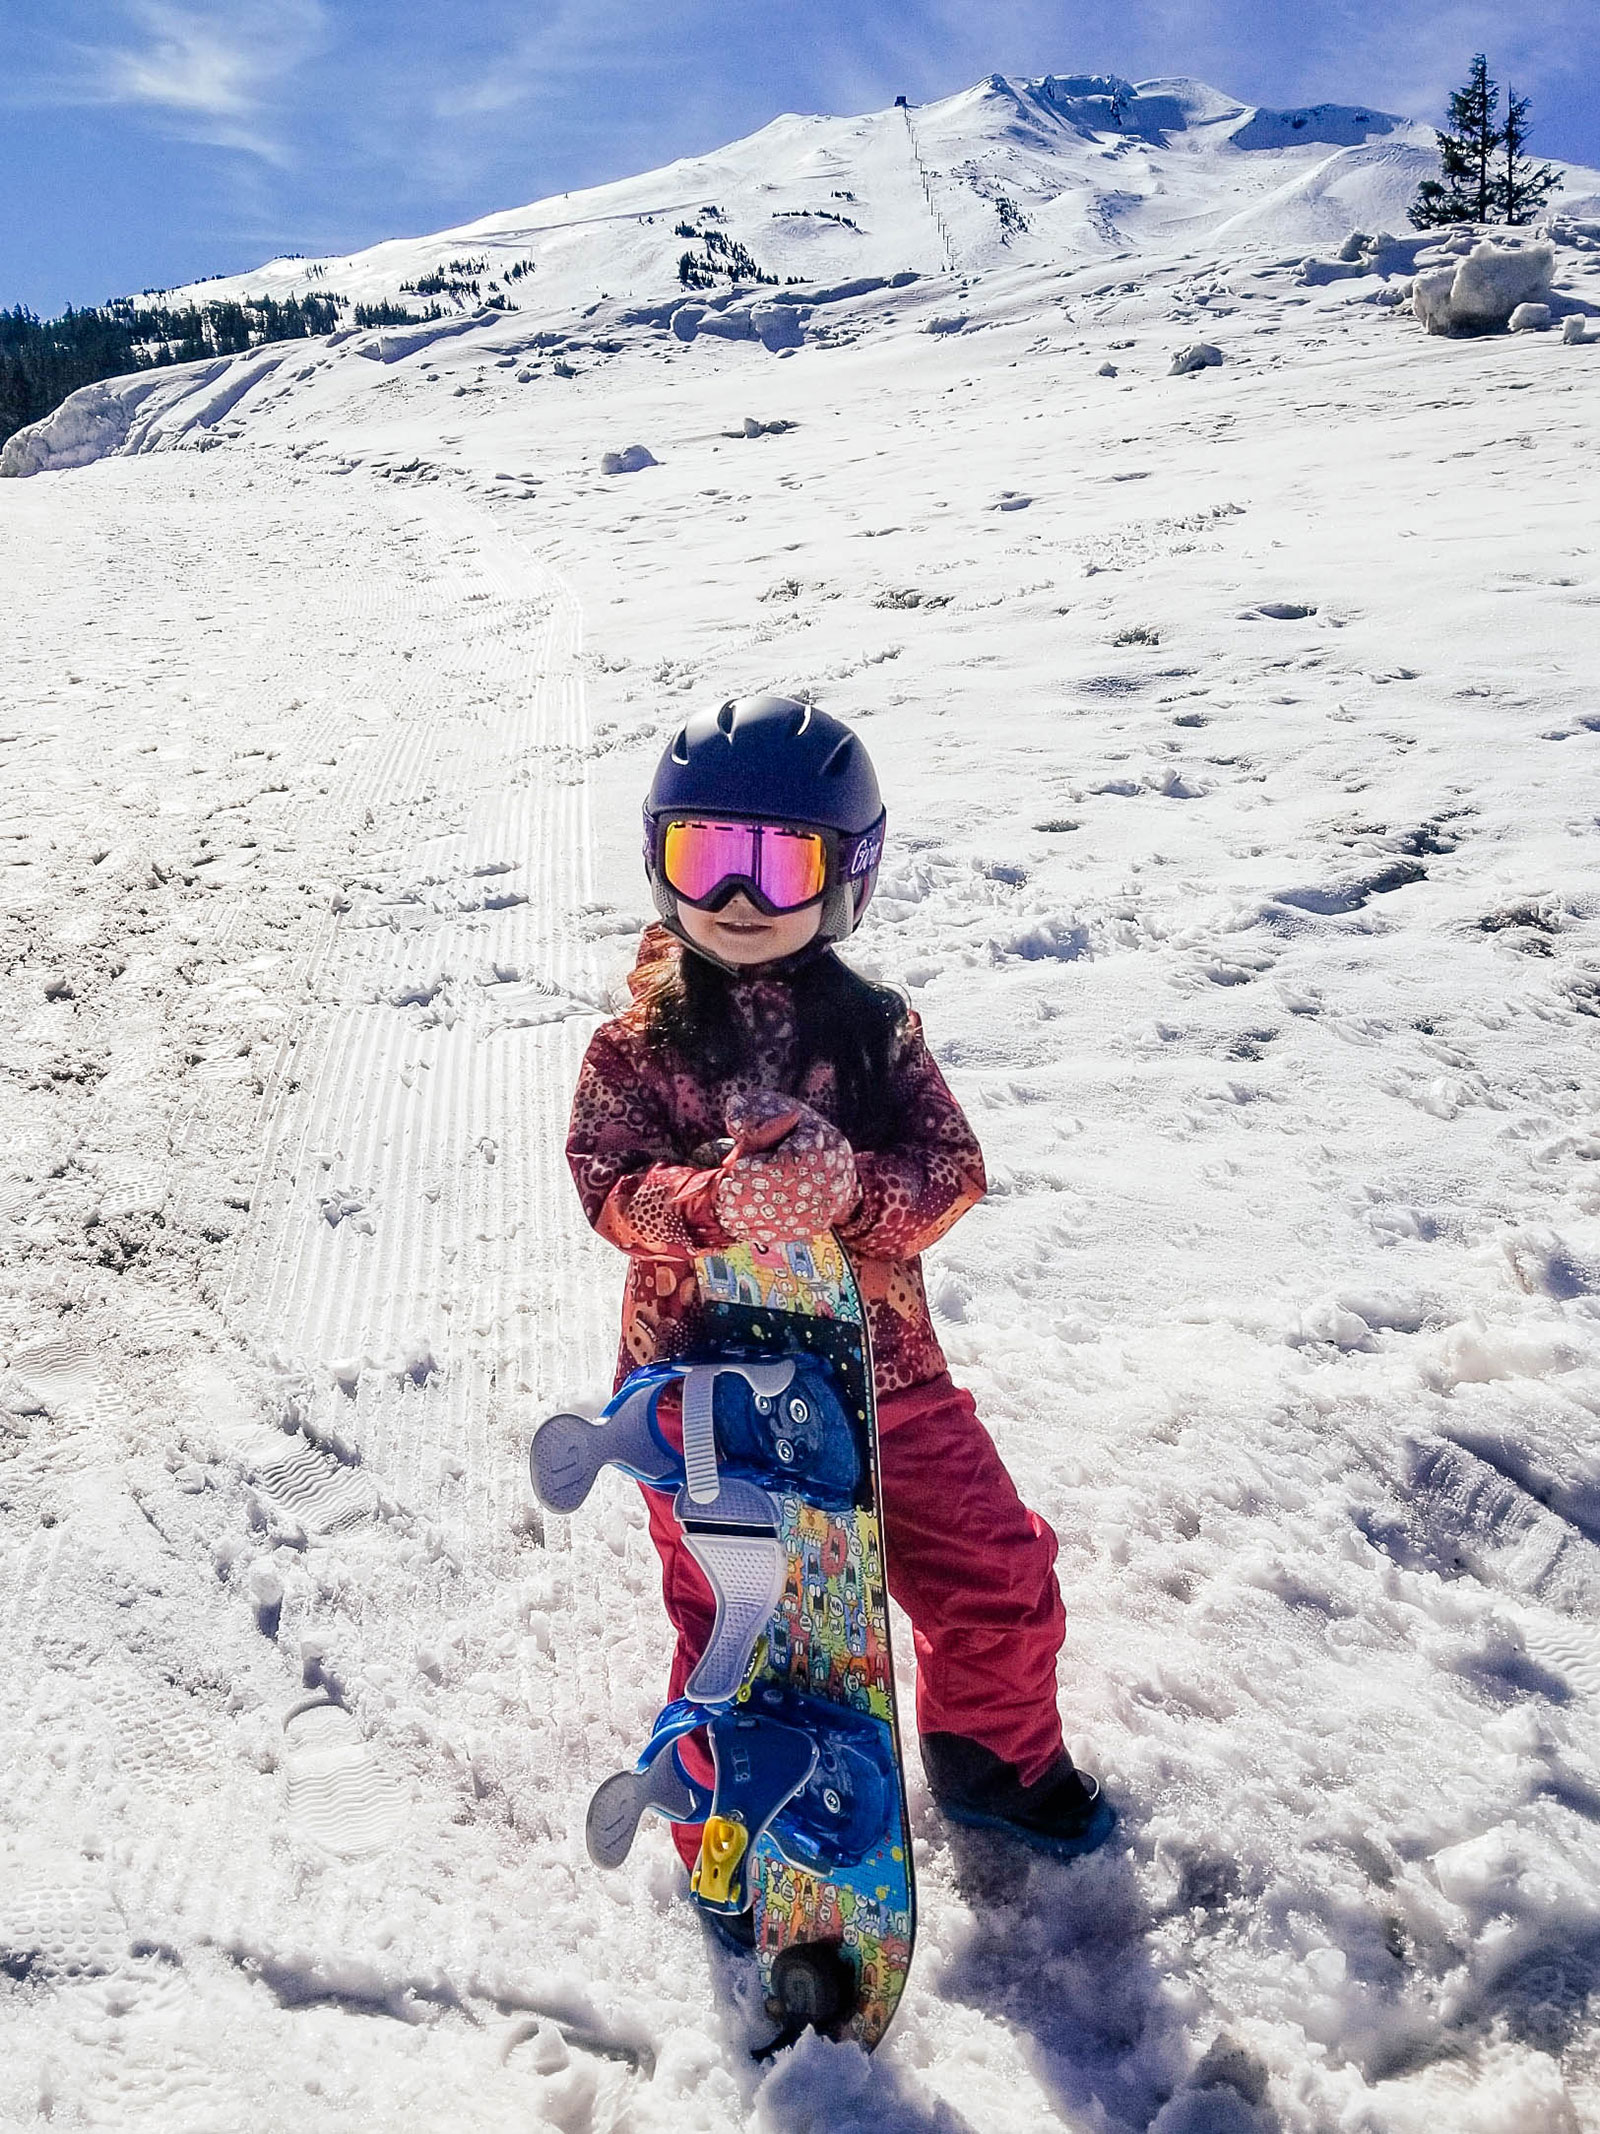 A 3-year-old toddler holding her snowboard and feeling stoked after a good run